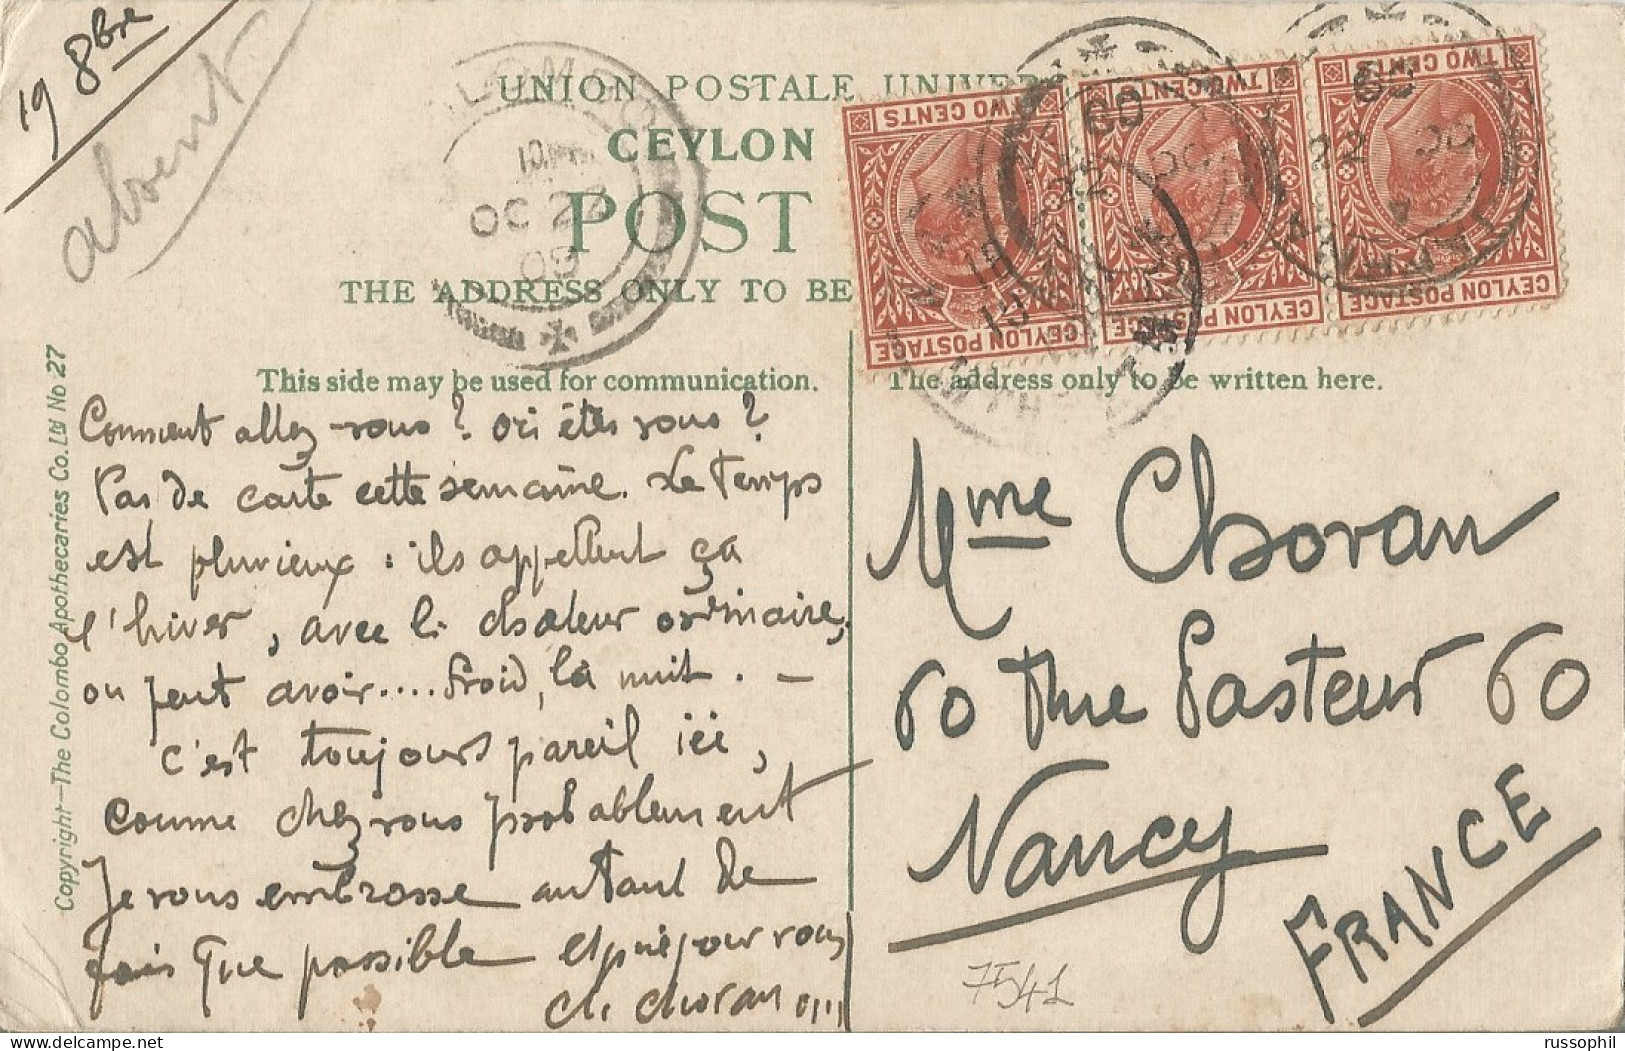 CEYLON – CURIOSITY / REVERSED DAY AND MONTH IN DATE BLOCK OF JAFFNA DEPARTURE CDS CANCELLING FRANKED PC - 1922 - Ceylan (...-1947)